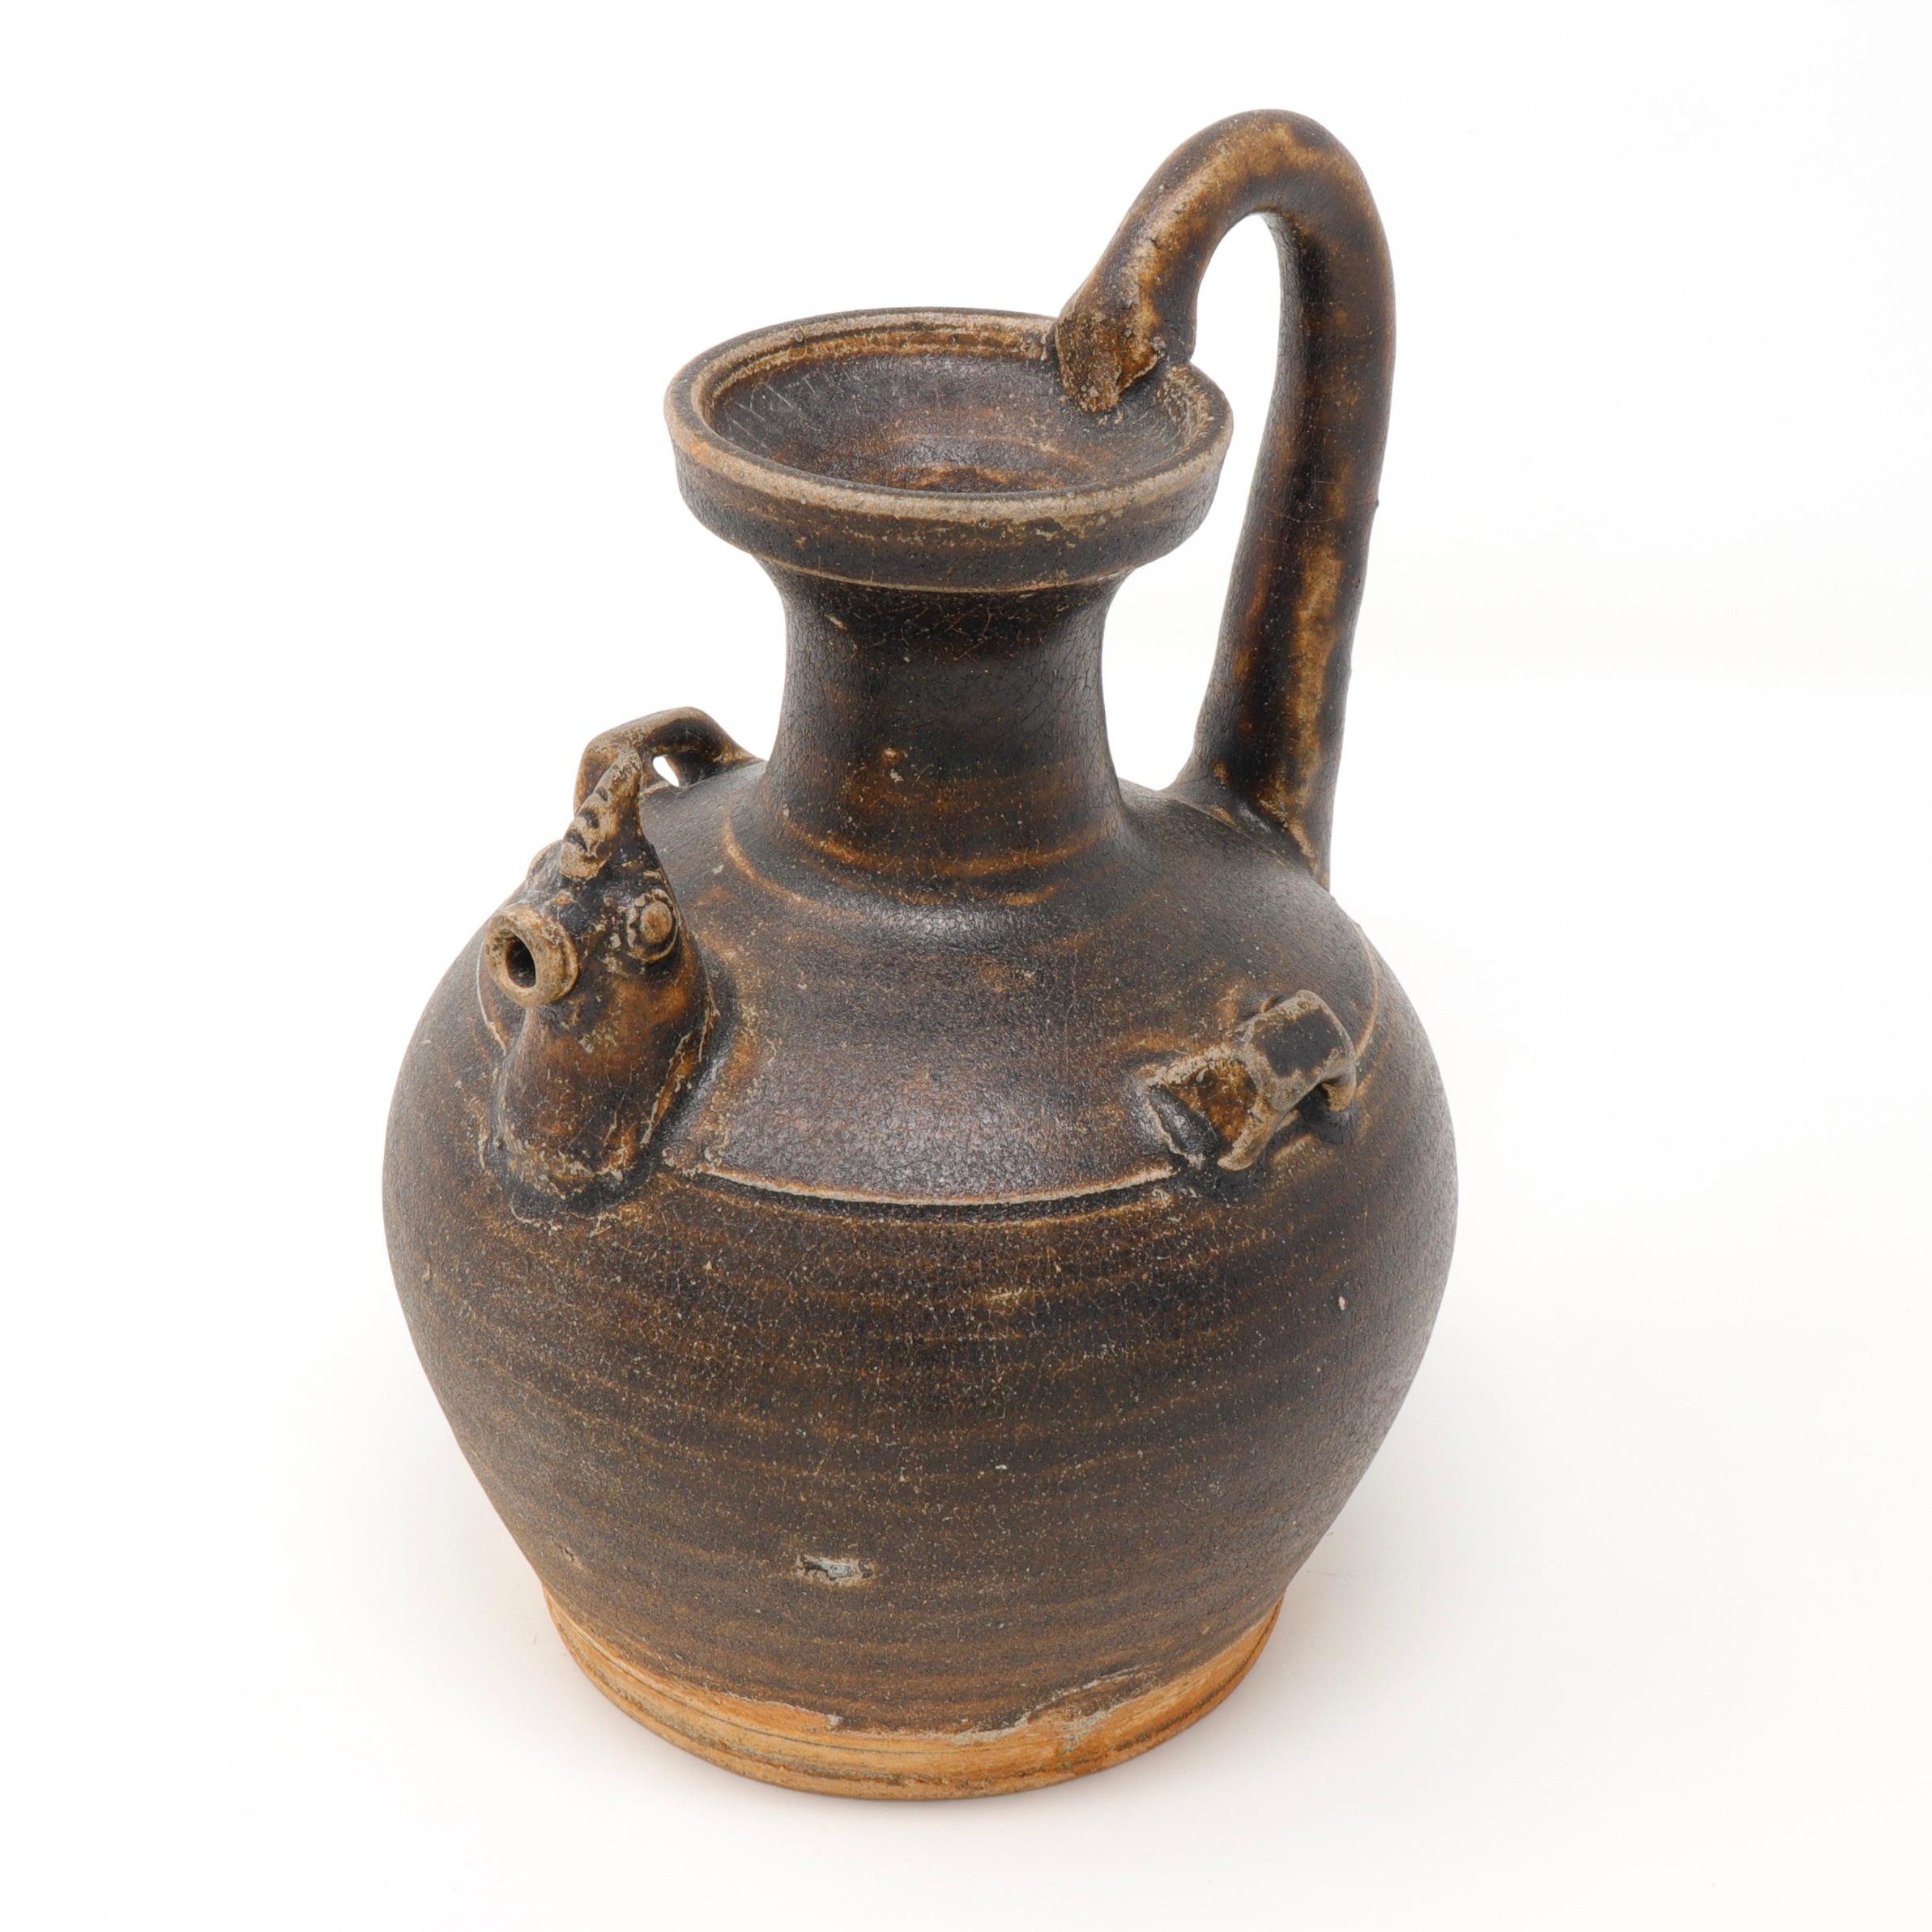 A globular stoneware body that is well potted with a cup shaped mouth supported on a narrow tall neck. The characteristic chicken head form serves as the spout. The handle is pulled and applied from the shoulder to the mouth. Another characteristic